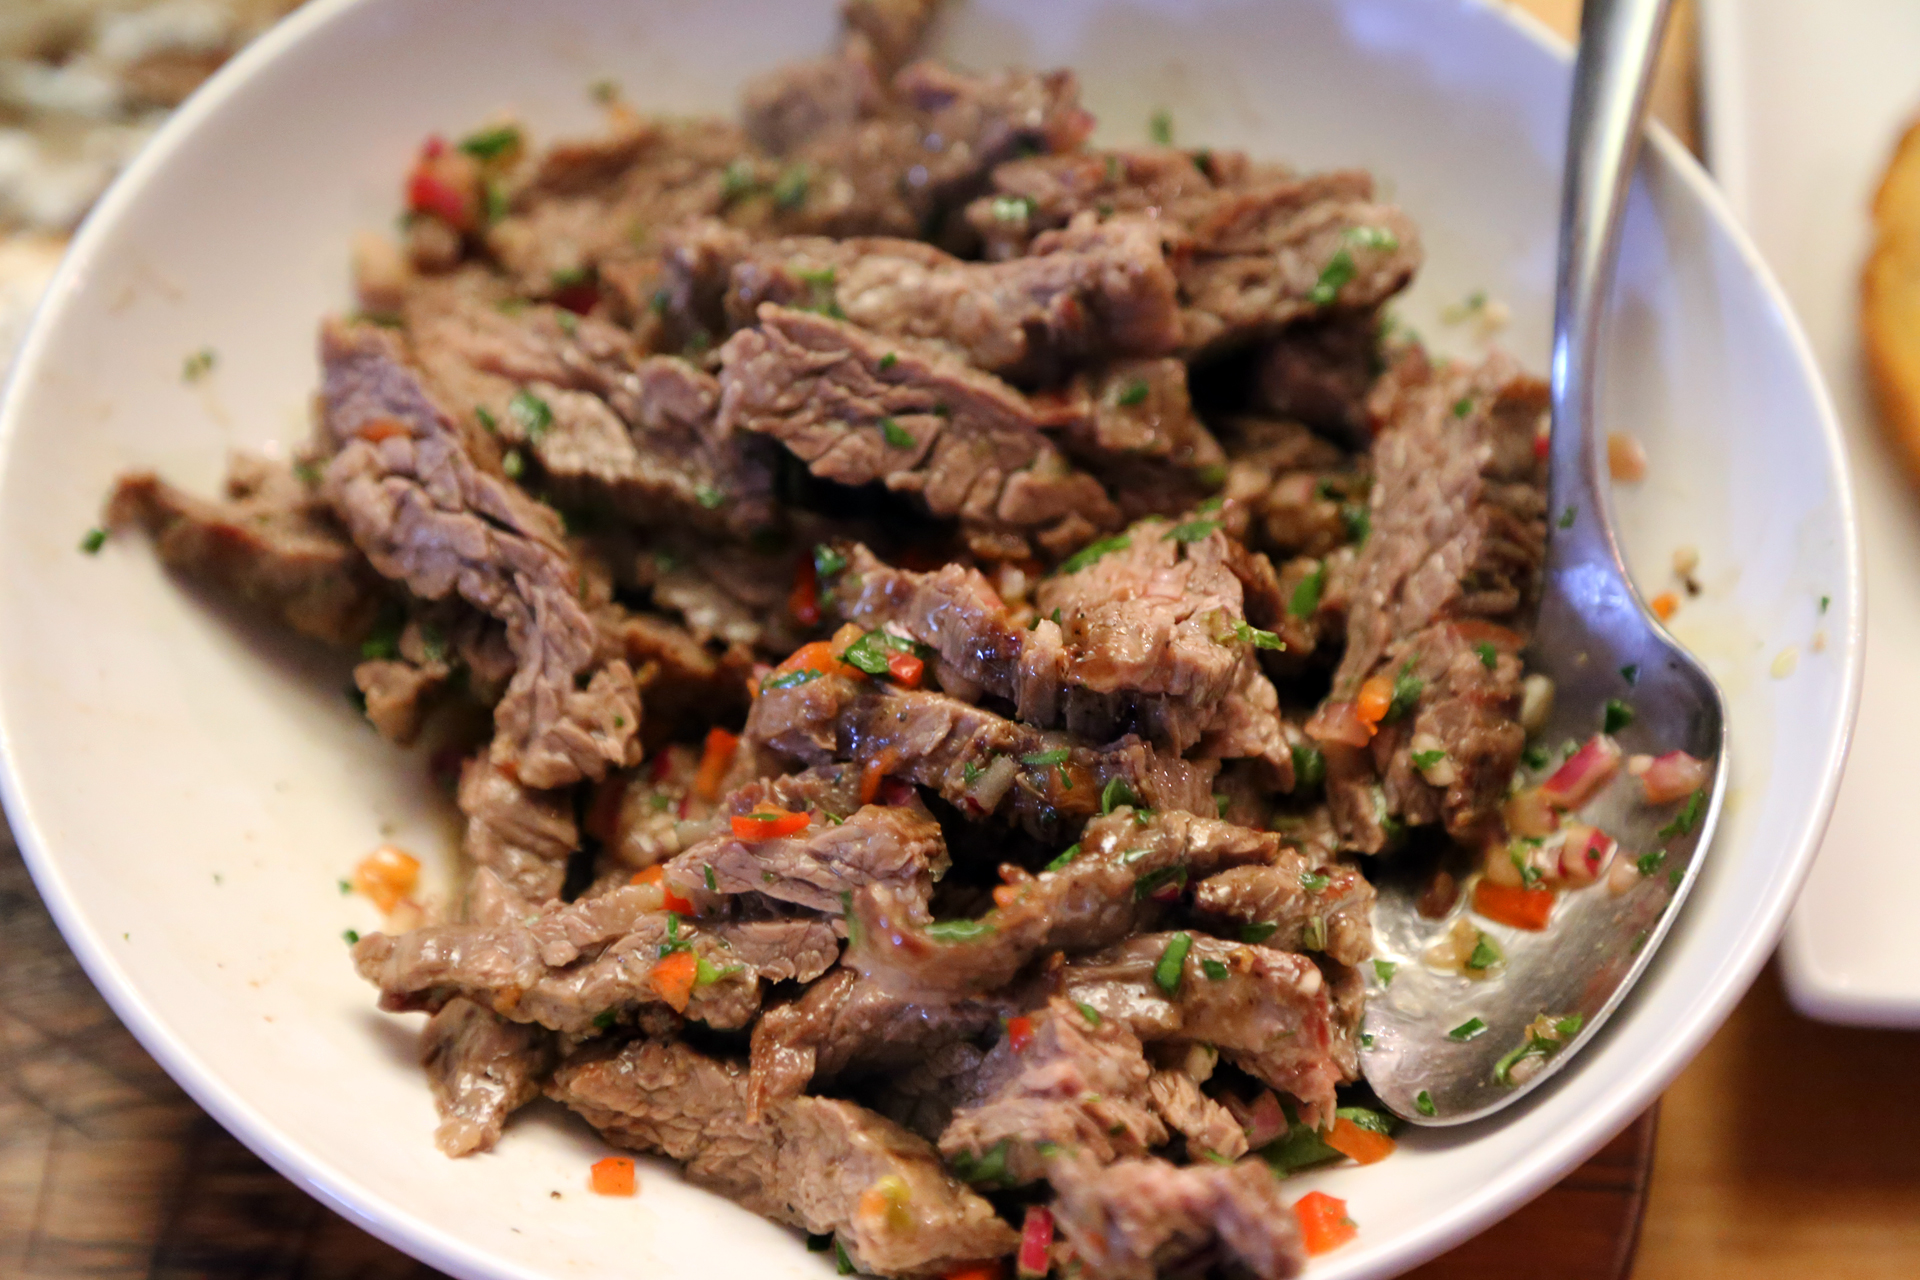 Toss the steak slices in a bowl with a few tbsp of the chimichurri sauce.